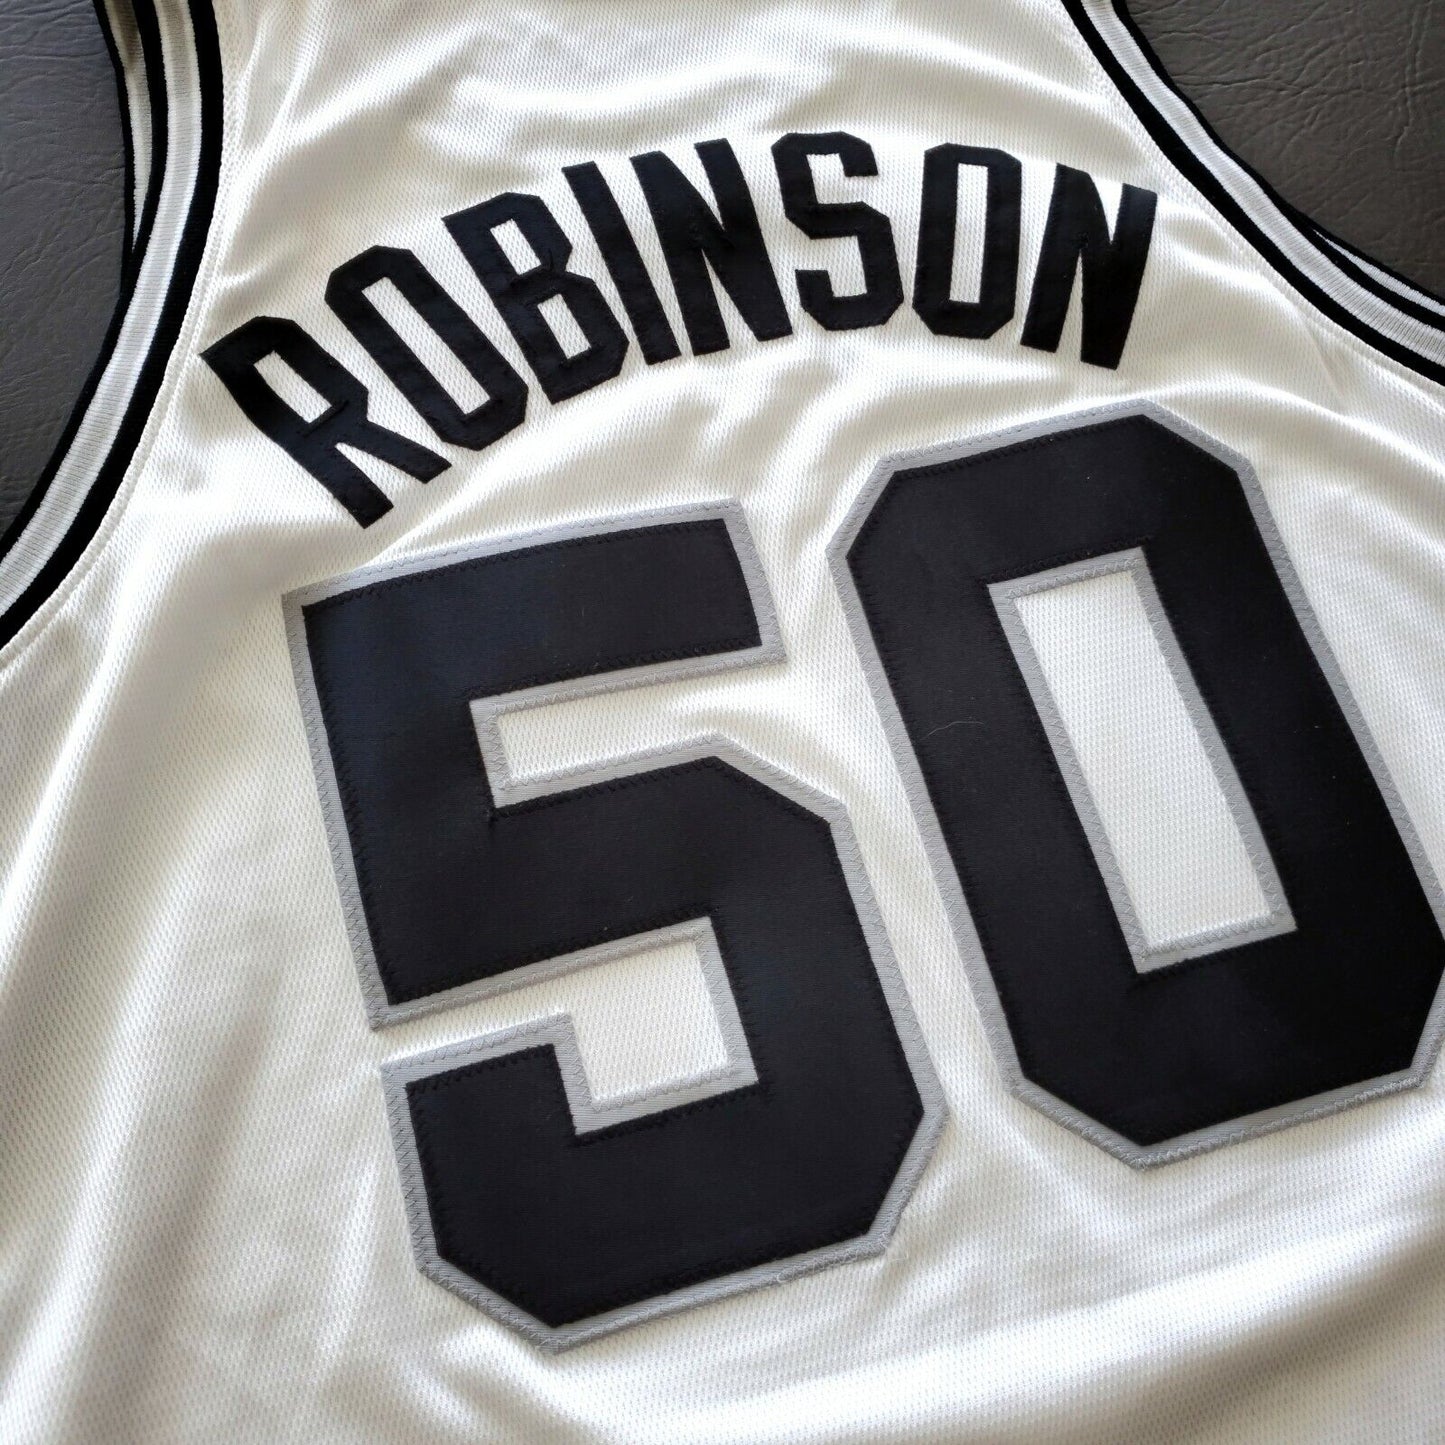 100% Authentic David Robinson Nike 01 02 911 Spurs Pro Cut Game Jersey 50+4"